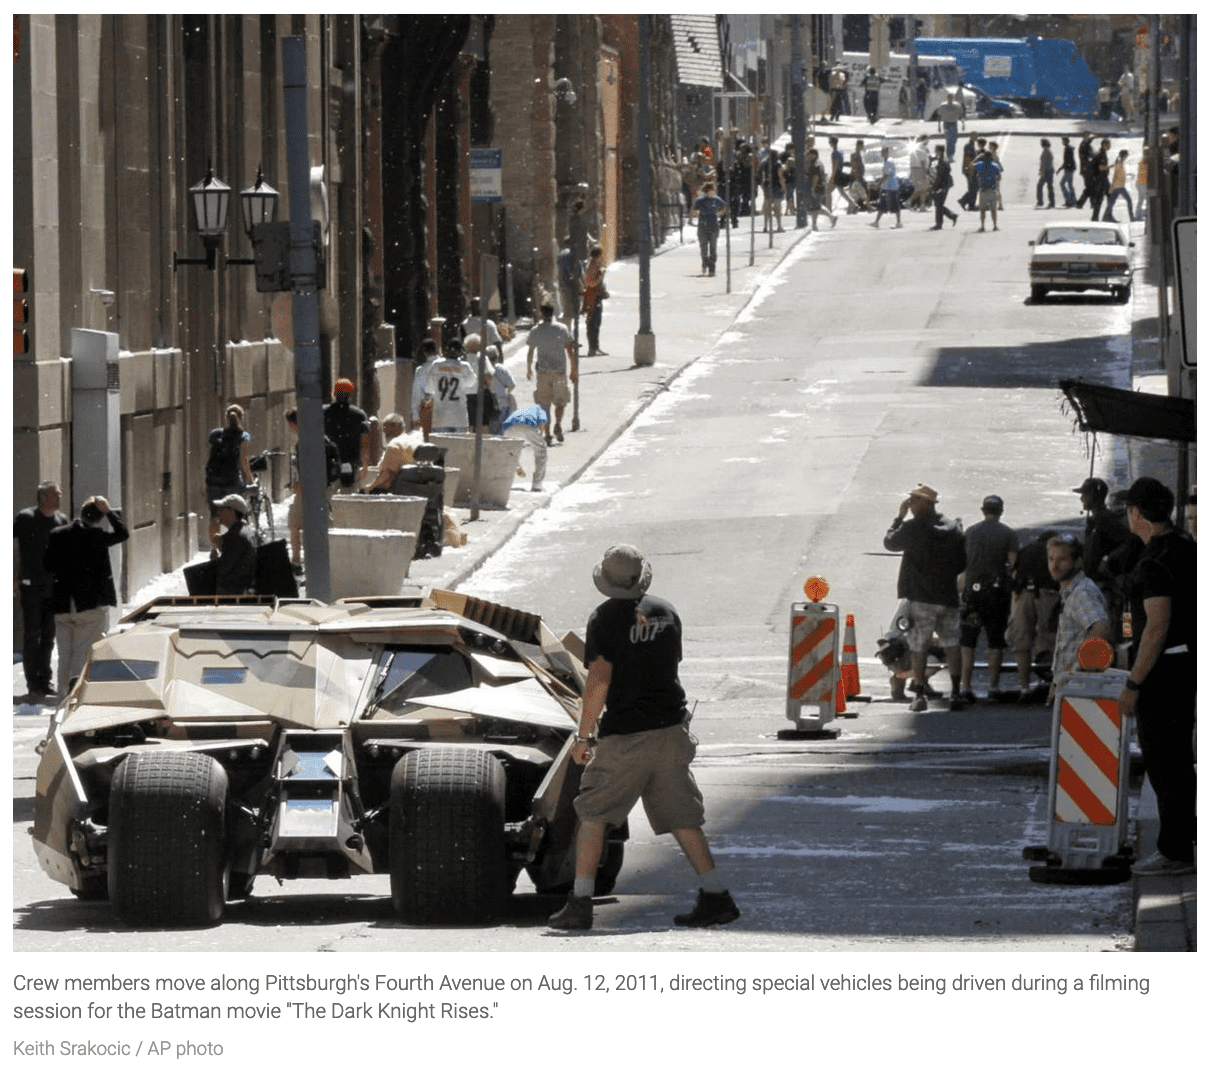   Crew members move along Pittsburgh's Fourth Avenue on Aug. 12, 2011, directing special vehicles being driven during a filming session for the Batman movie "The Dark Knight Rises." Keith Srakocic / AP photo 